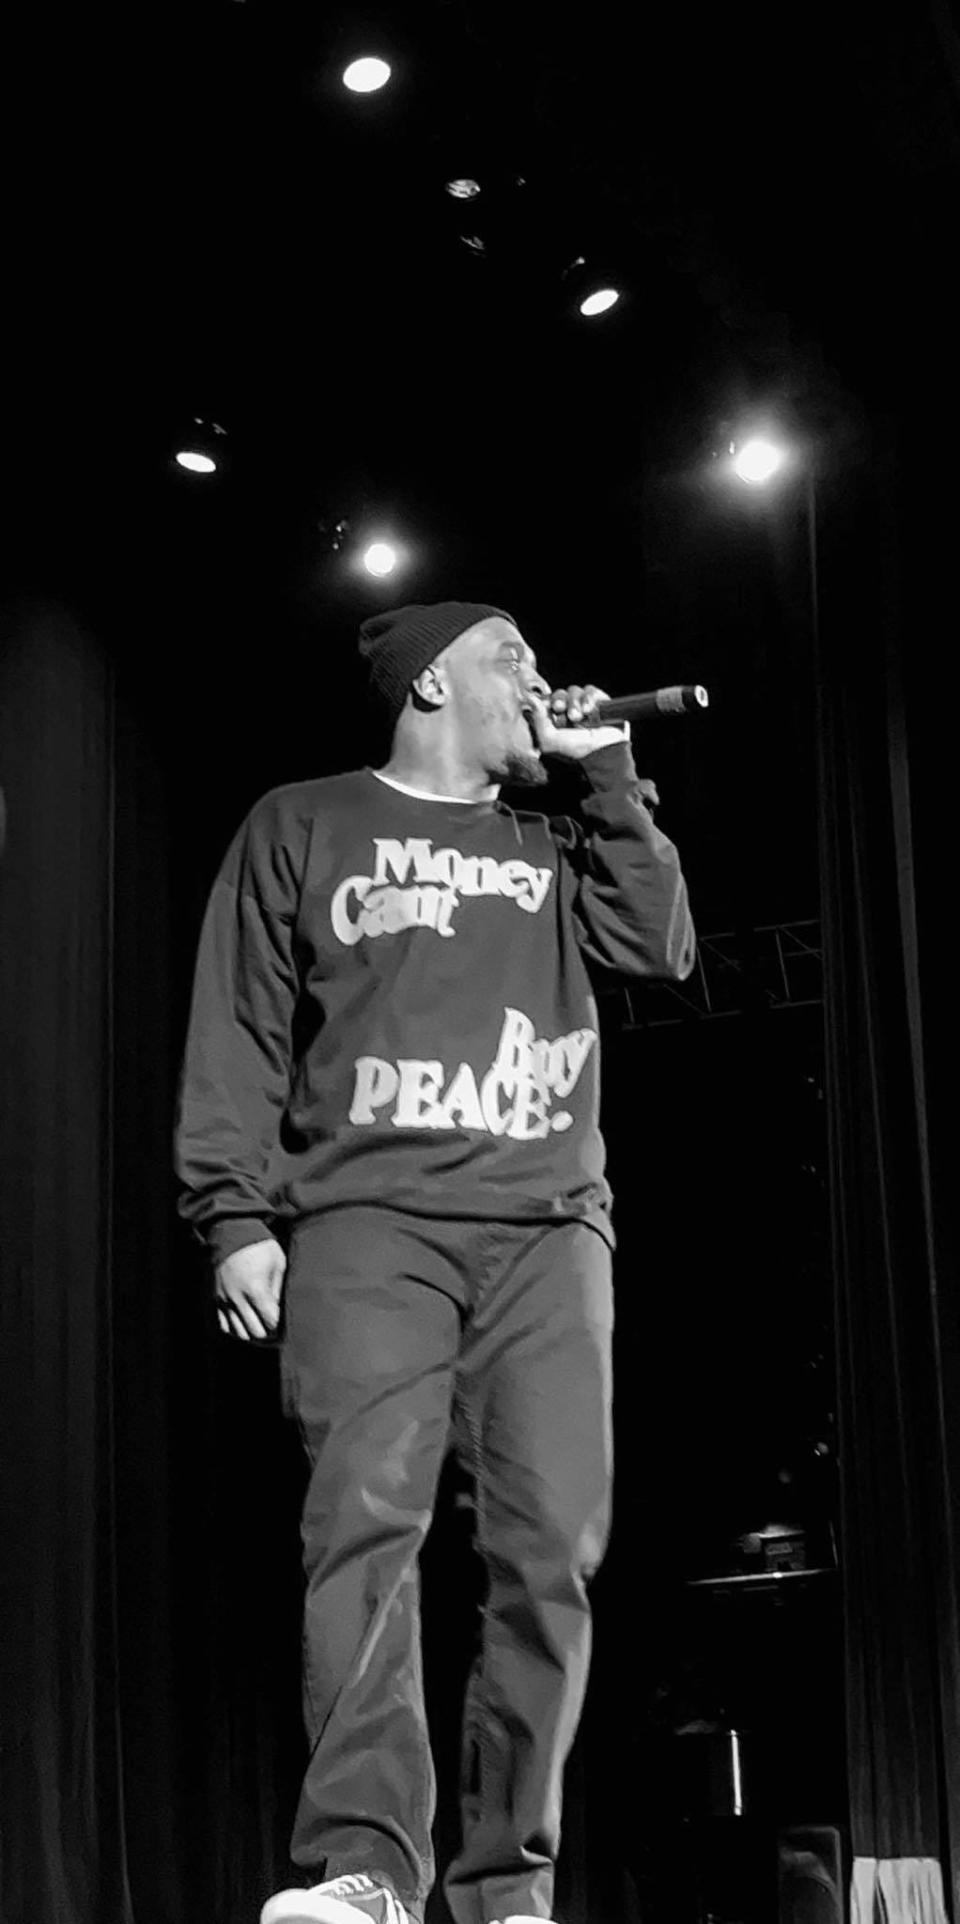 Jéan P the MC is shown performing. The Canton native and hip-hop artist released a new album last year, "The Way Eye See It."